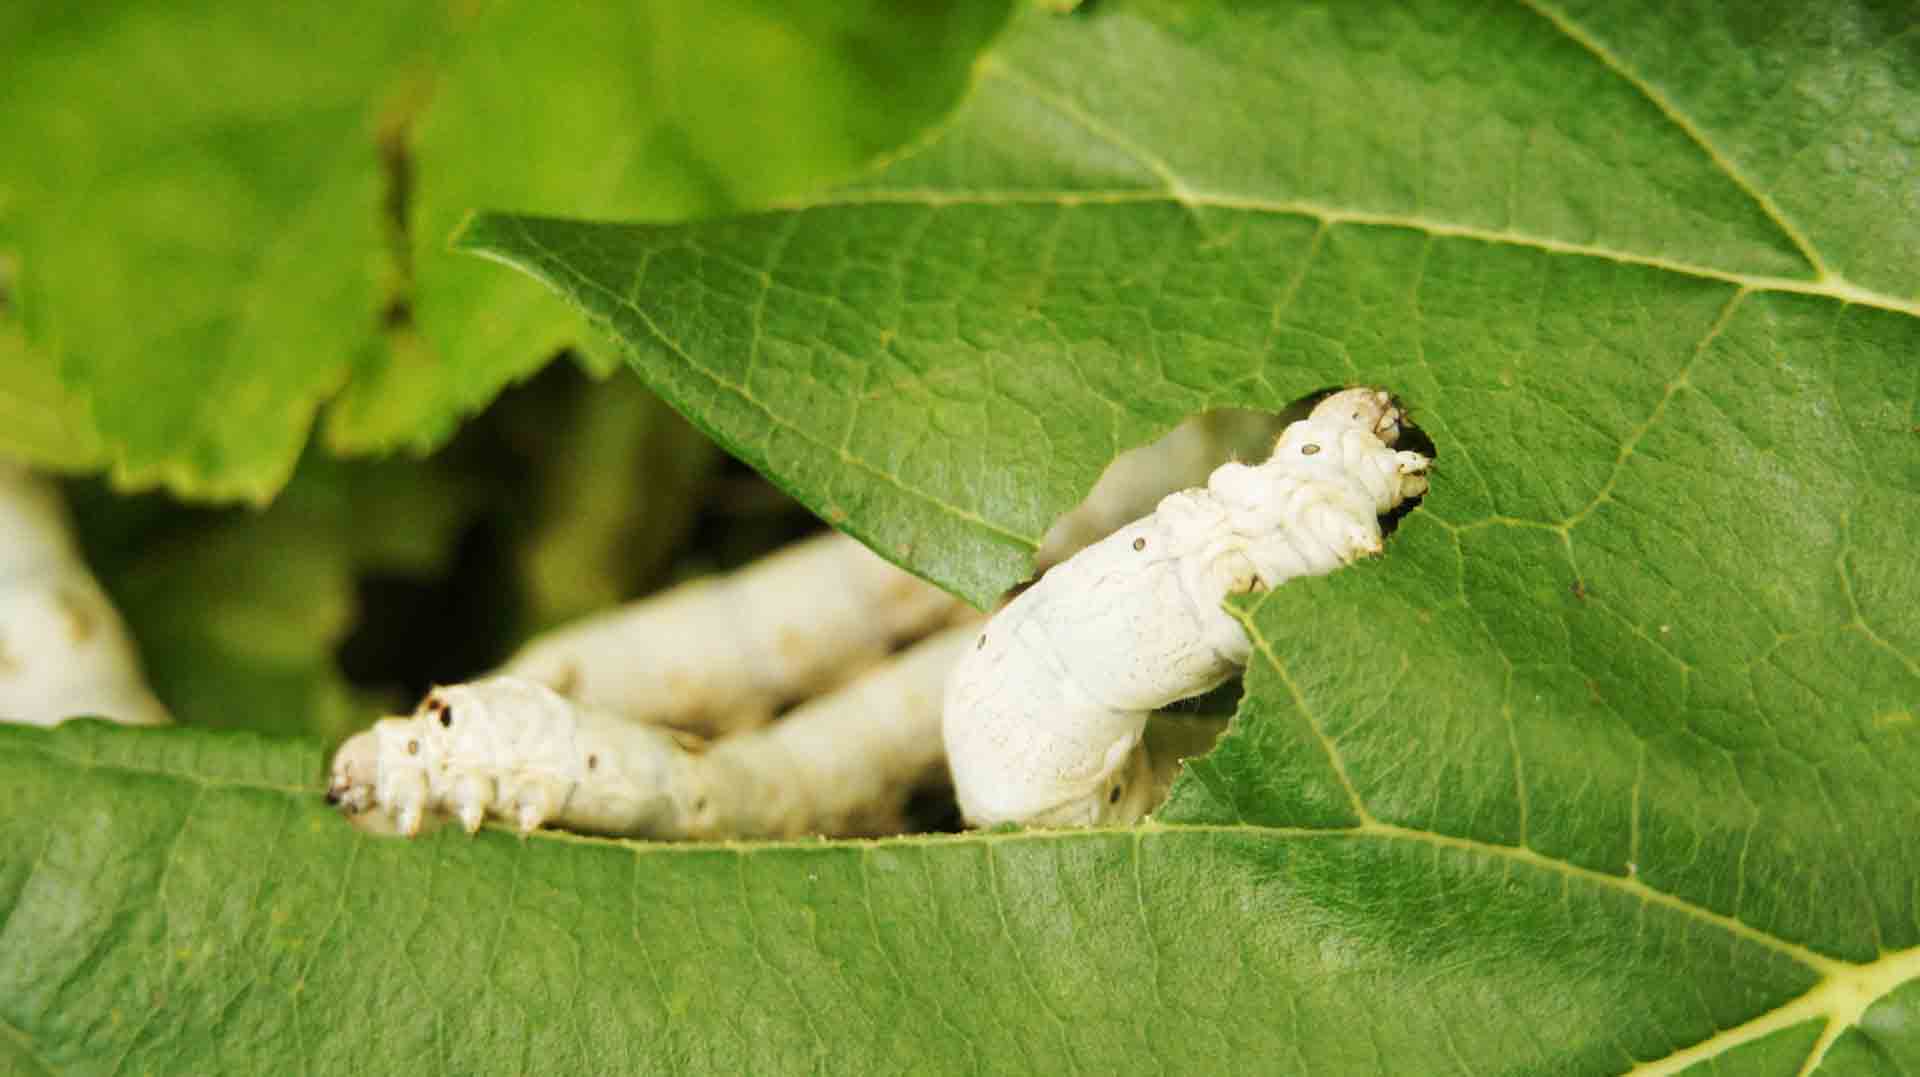 Silkworms eating mulberry leaves